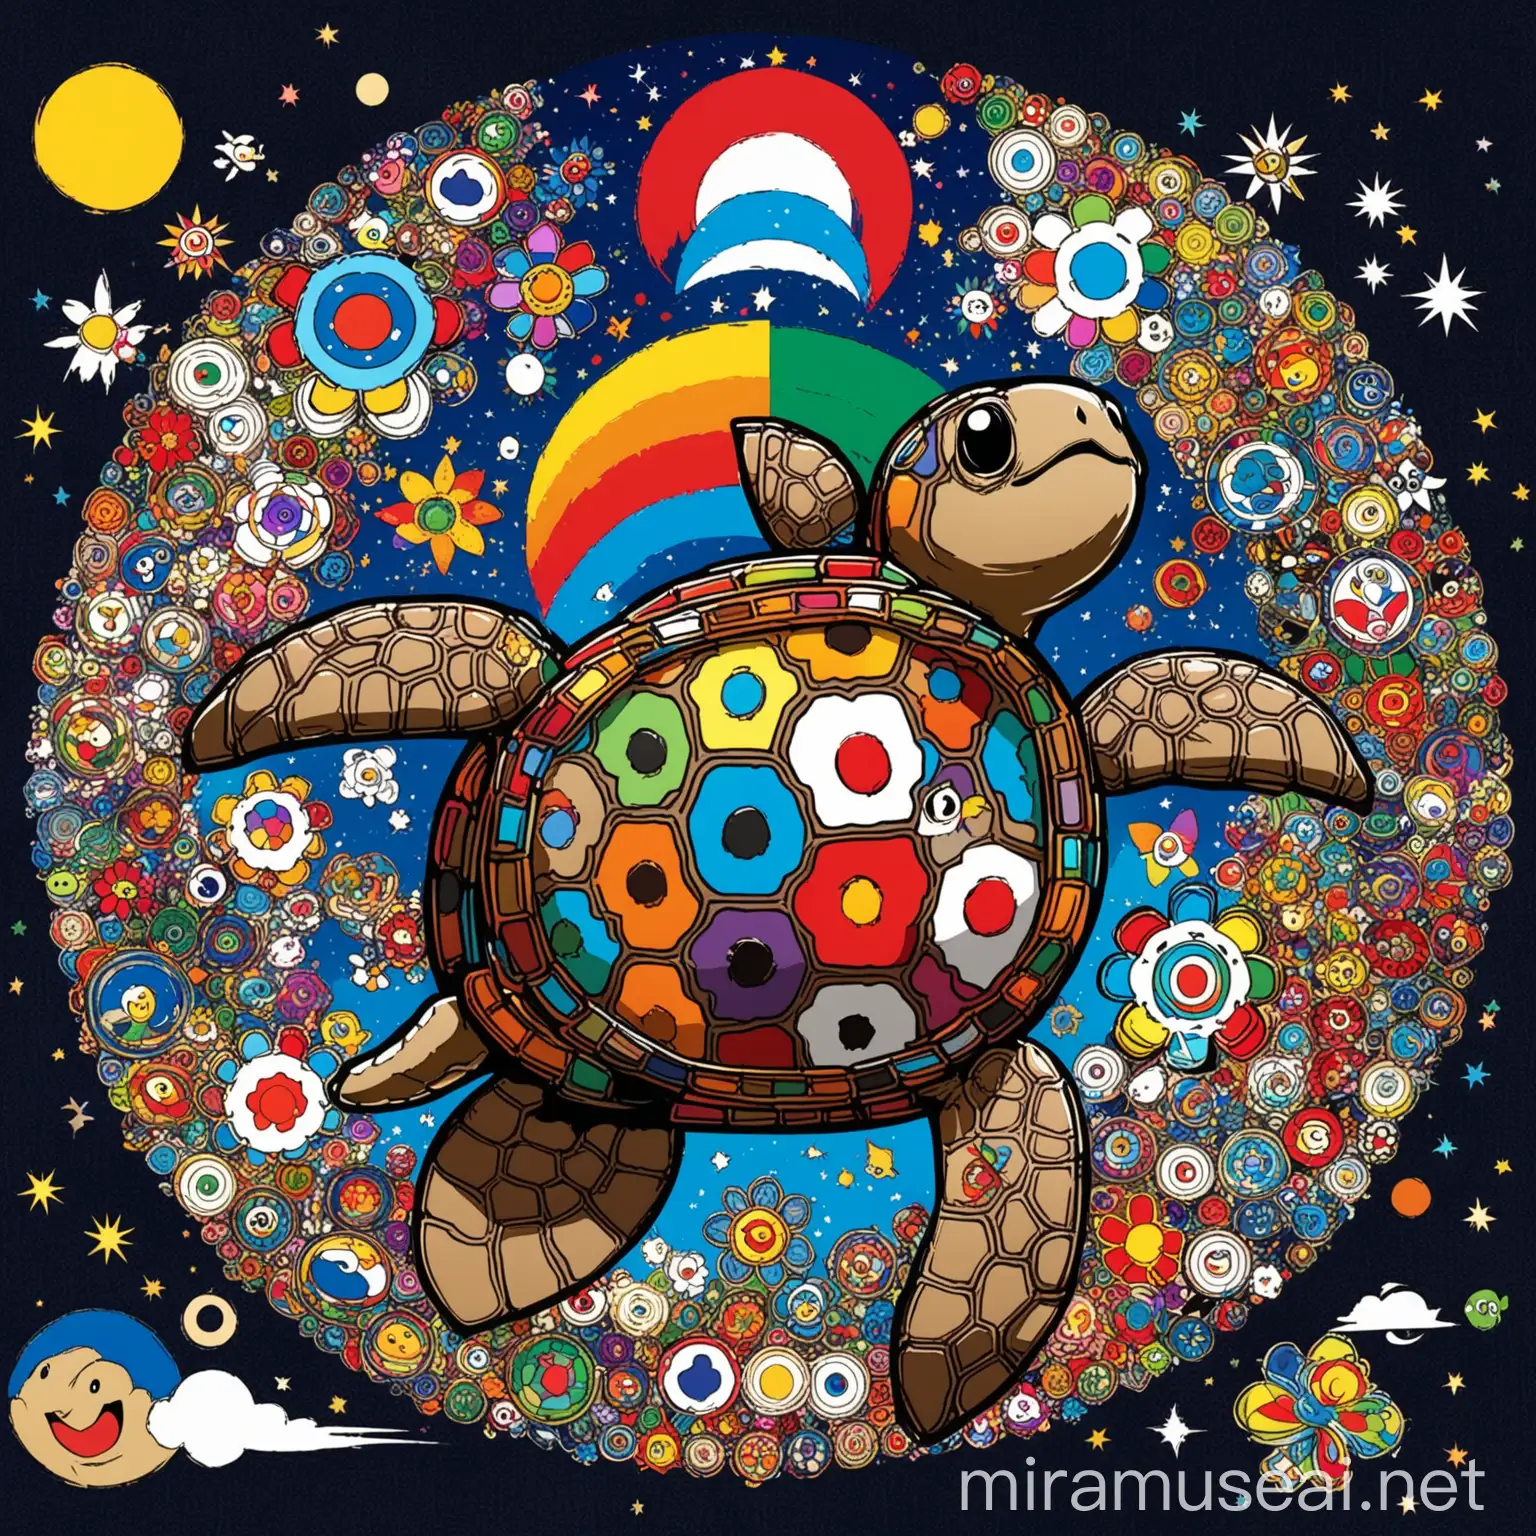 Imagine a logo inspired by Takashi Murakami's style, featuring a charismatic turtle amidst the celestial and floral elements. The turtle, depicted with bold lines and vibrant colors, adds a playful yet masculine touch to the design. This fusion of cosmic motifs and Murakami's iconic characters creates a captivating and distinctive logo that would be perfect for leather goods, denim, and shoes, infusing them with both style and personality.